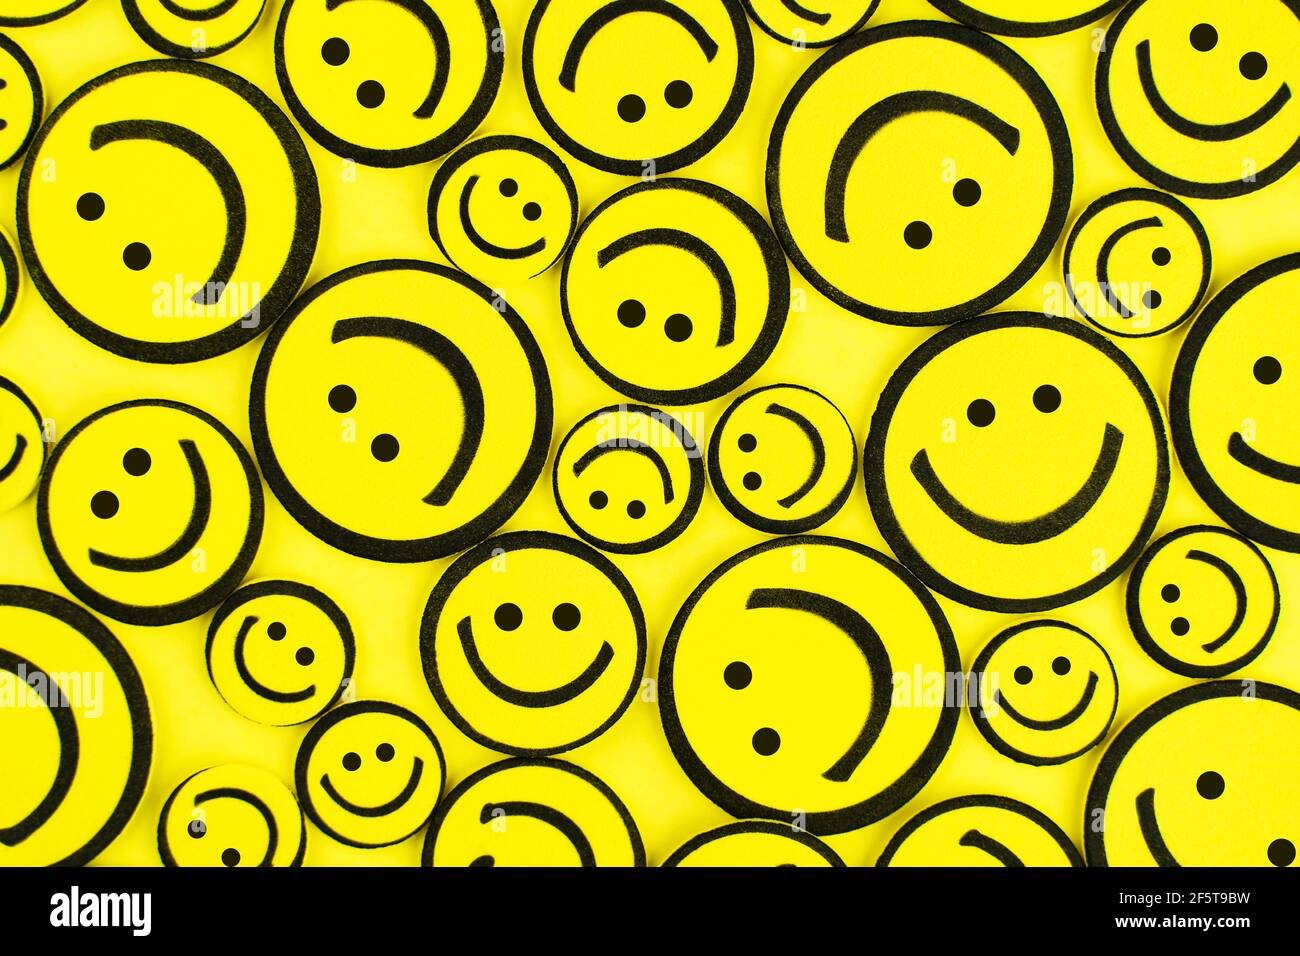 Yellow positive emoticons background. Smile and joy concept. Good morning. Have a nice day! Stock Photo